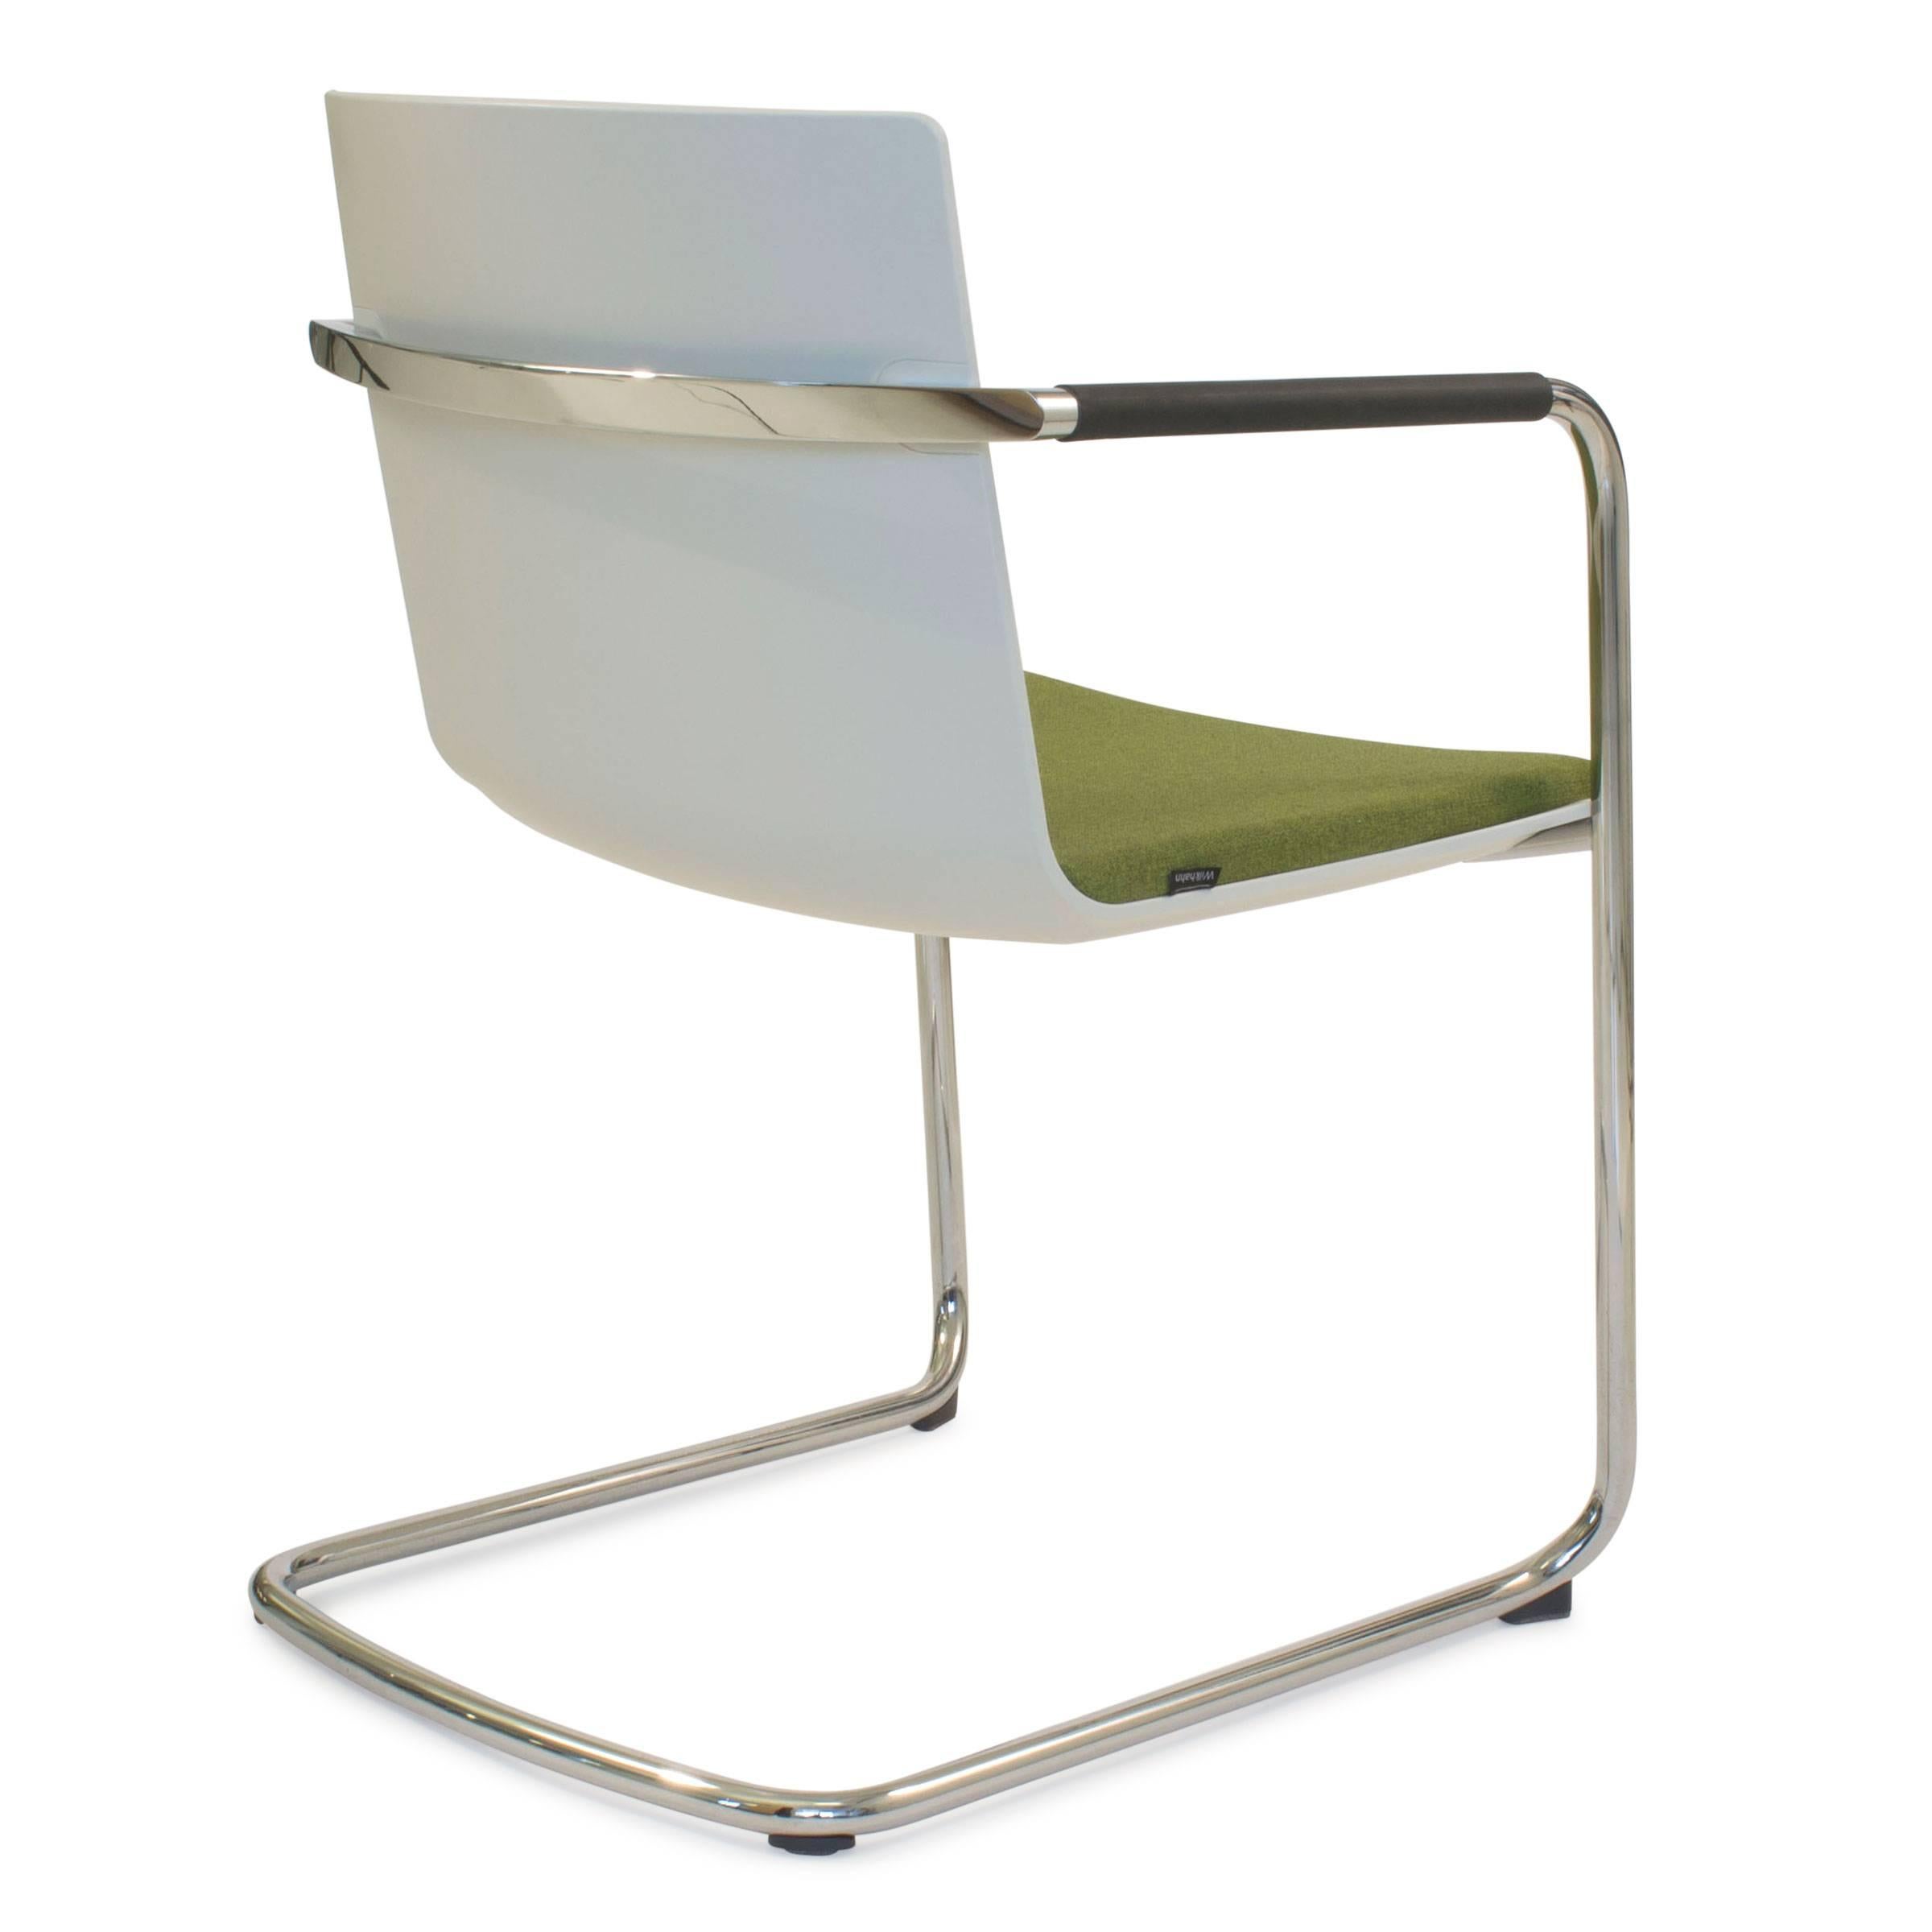 Green and White Neos 183/3 Cantilever Chair by Wiege for Wilkhahn, Germany In Good Condition For Sale In Brooklyn, NY